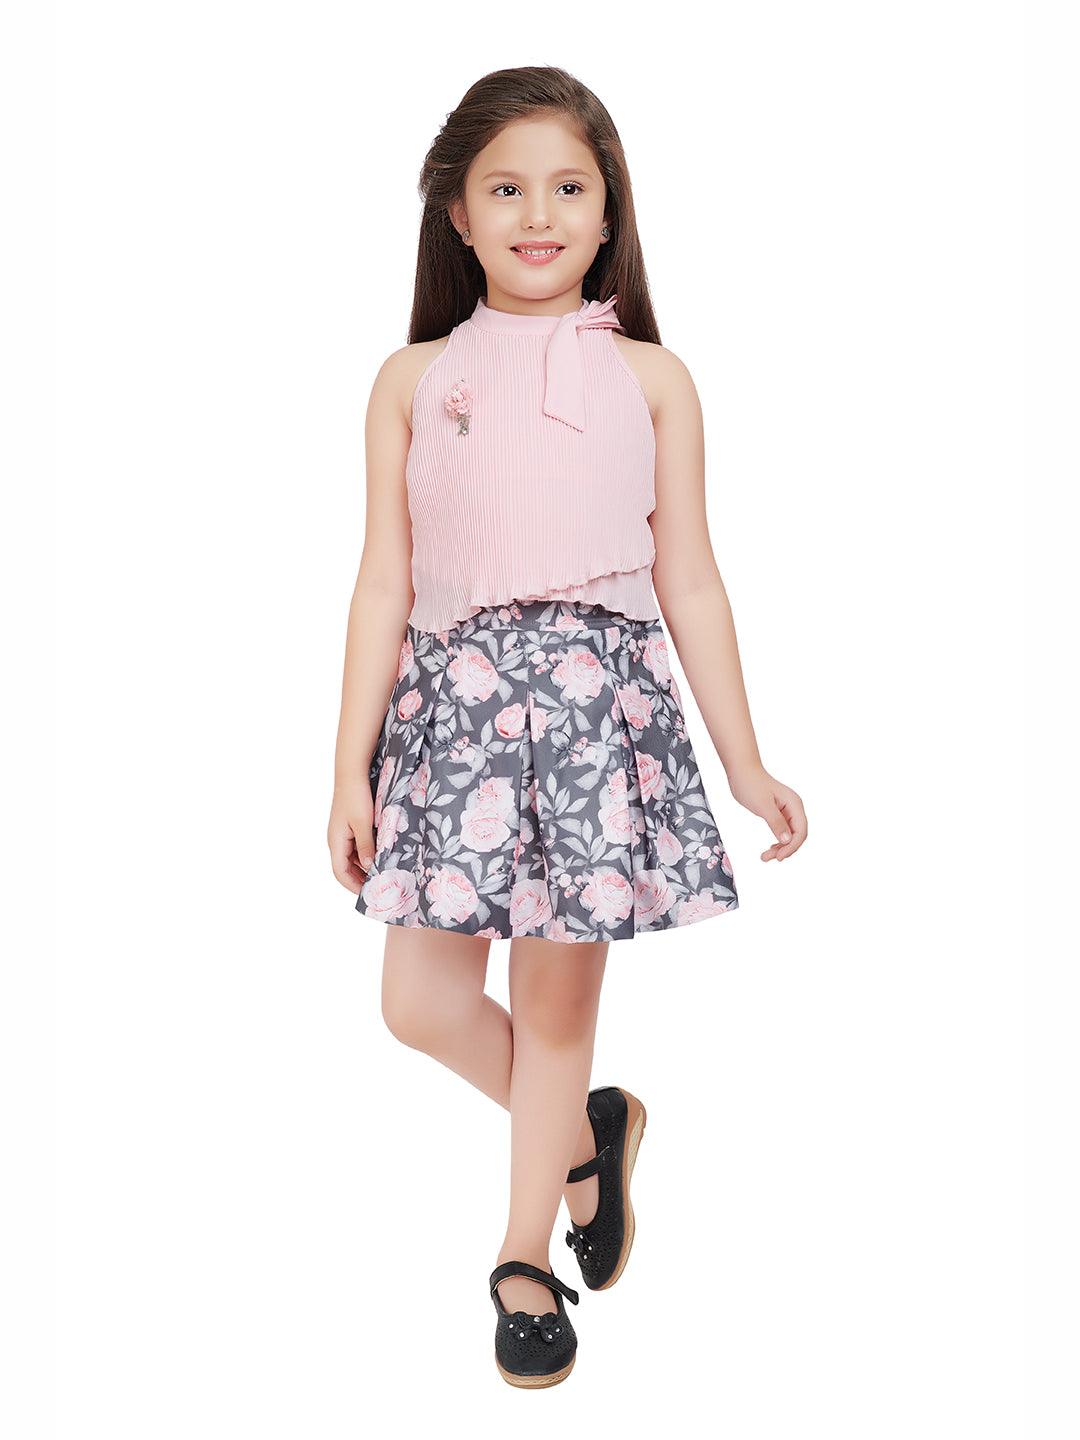 Pink  Colored Skirt Top set - 2073 Pink - TINY BABY INDIA shop.tinybaby.in